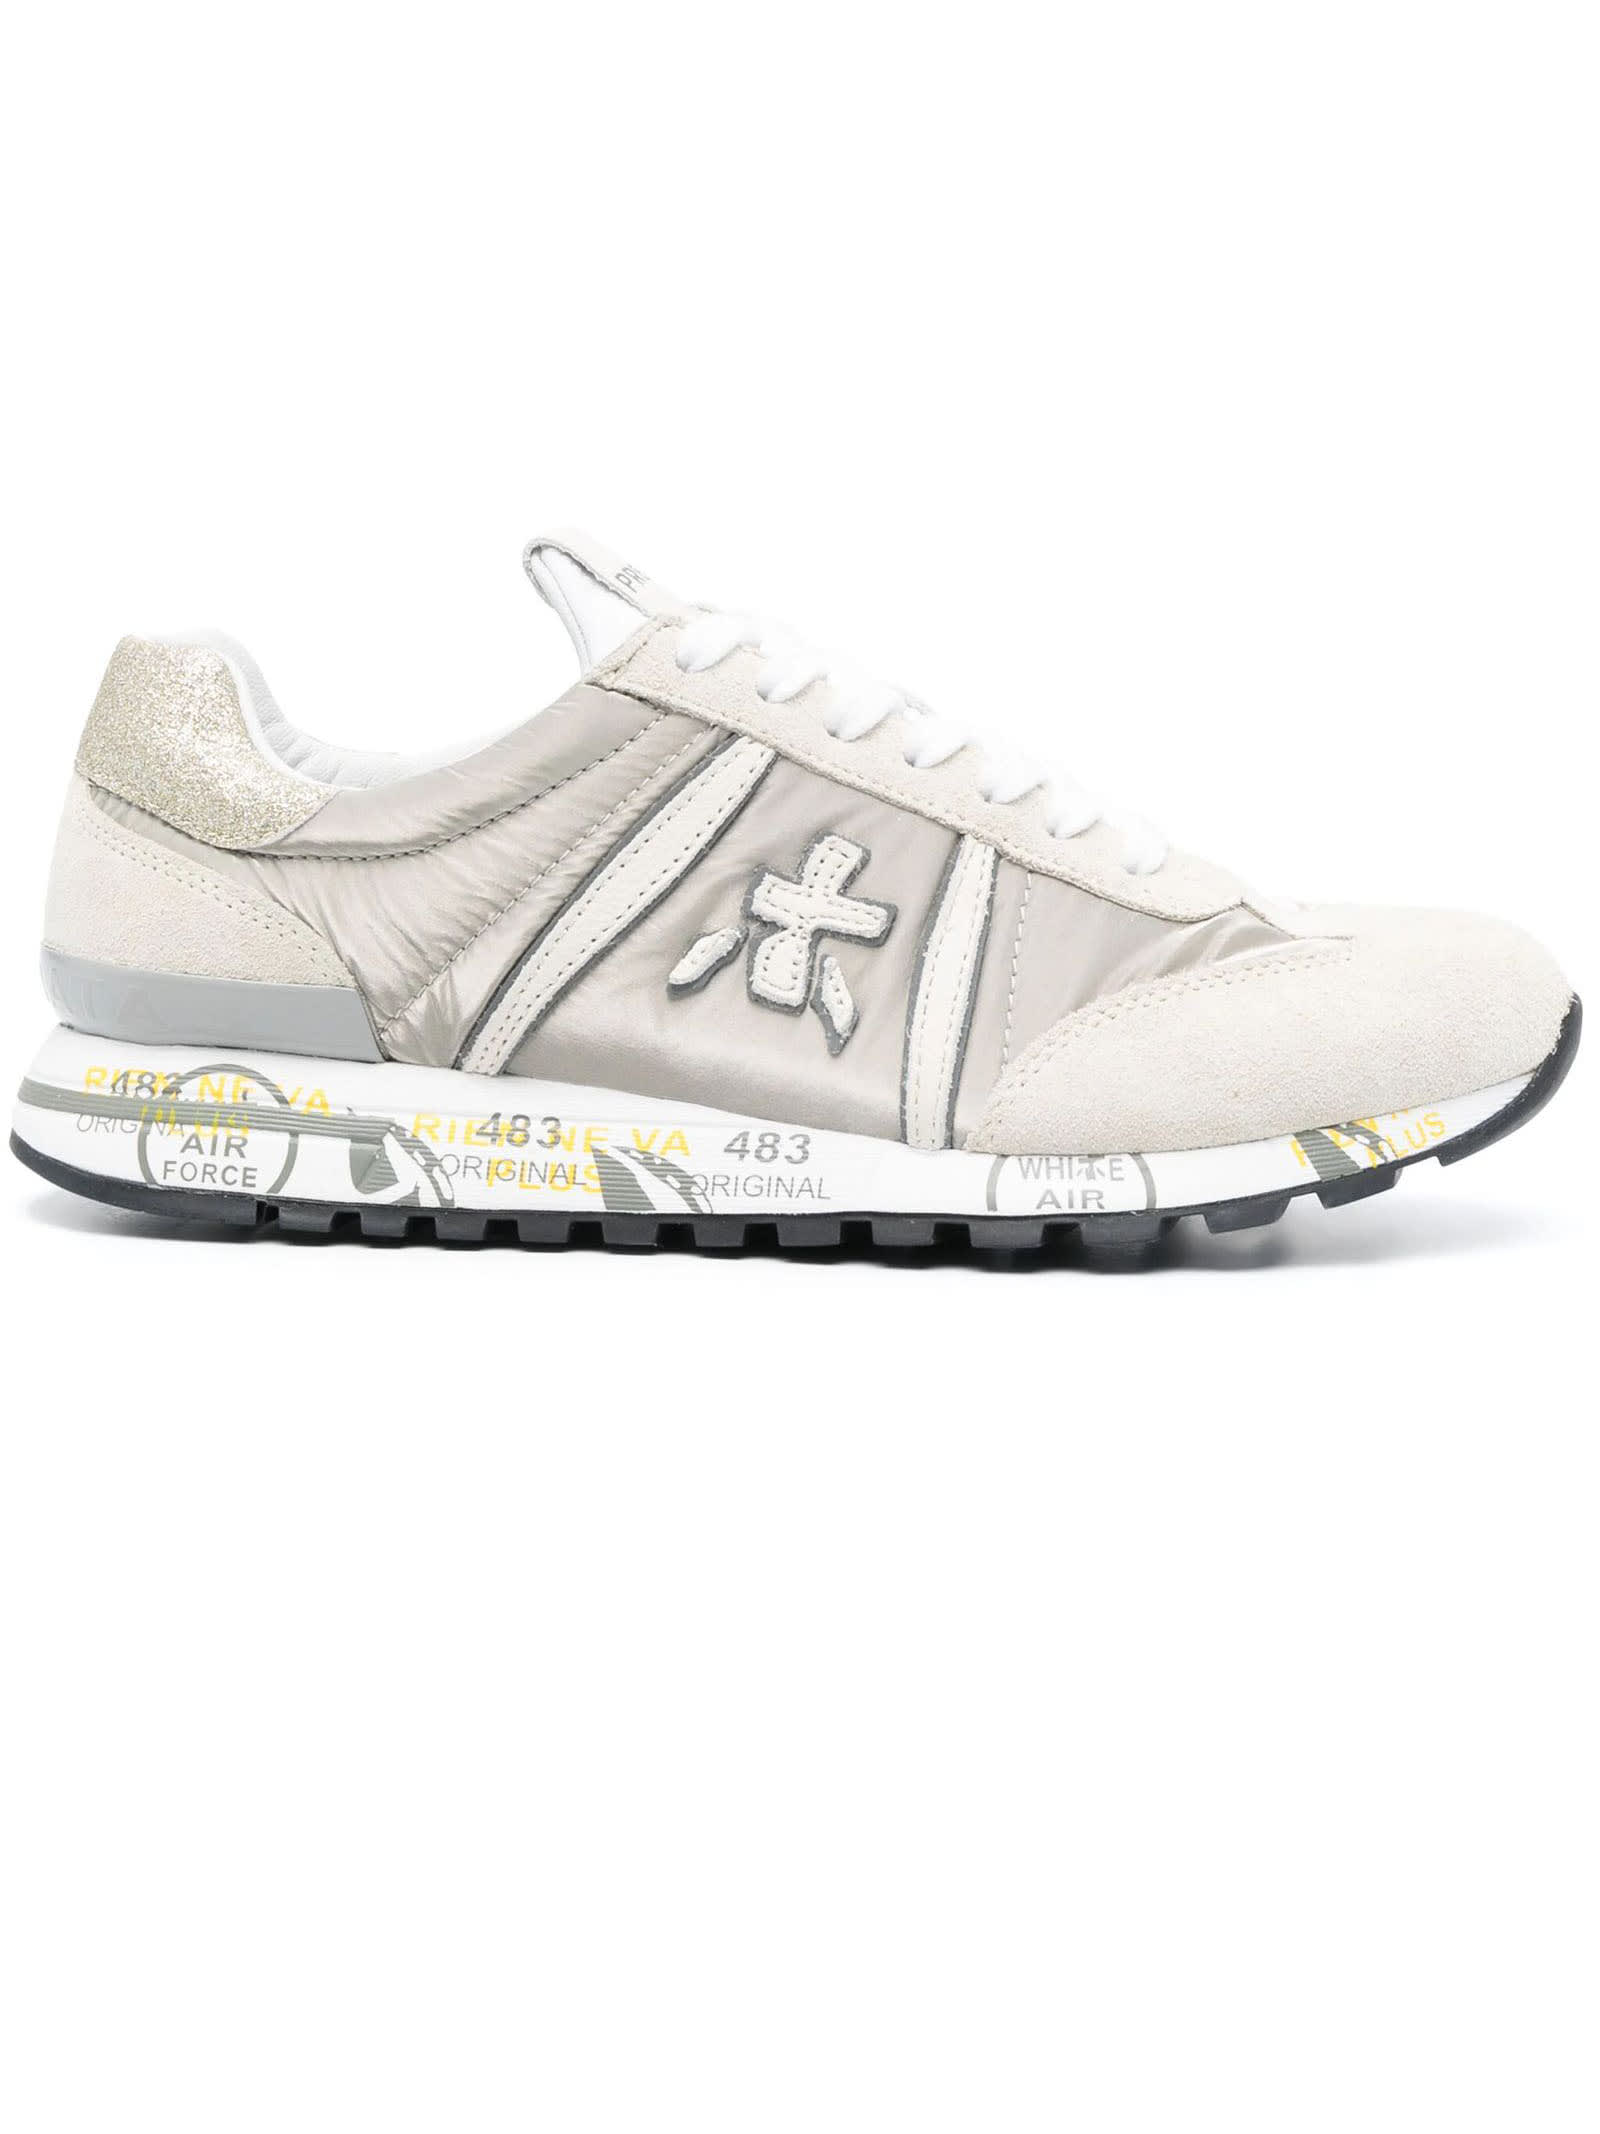 PREMIATA BEIGE AND LIGHT GREY LUCY SNEAKERS